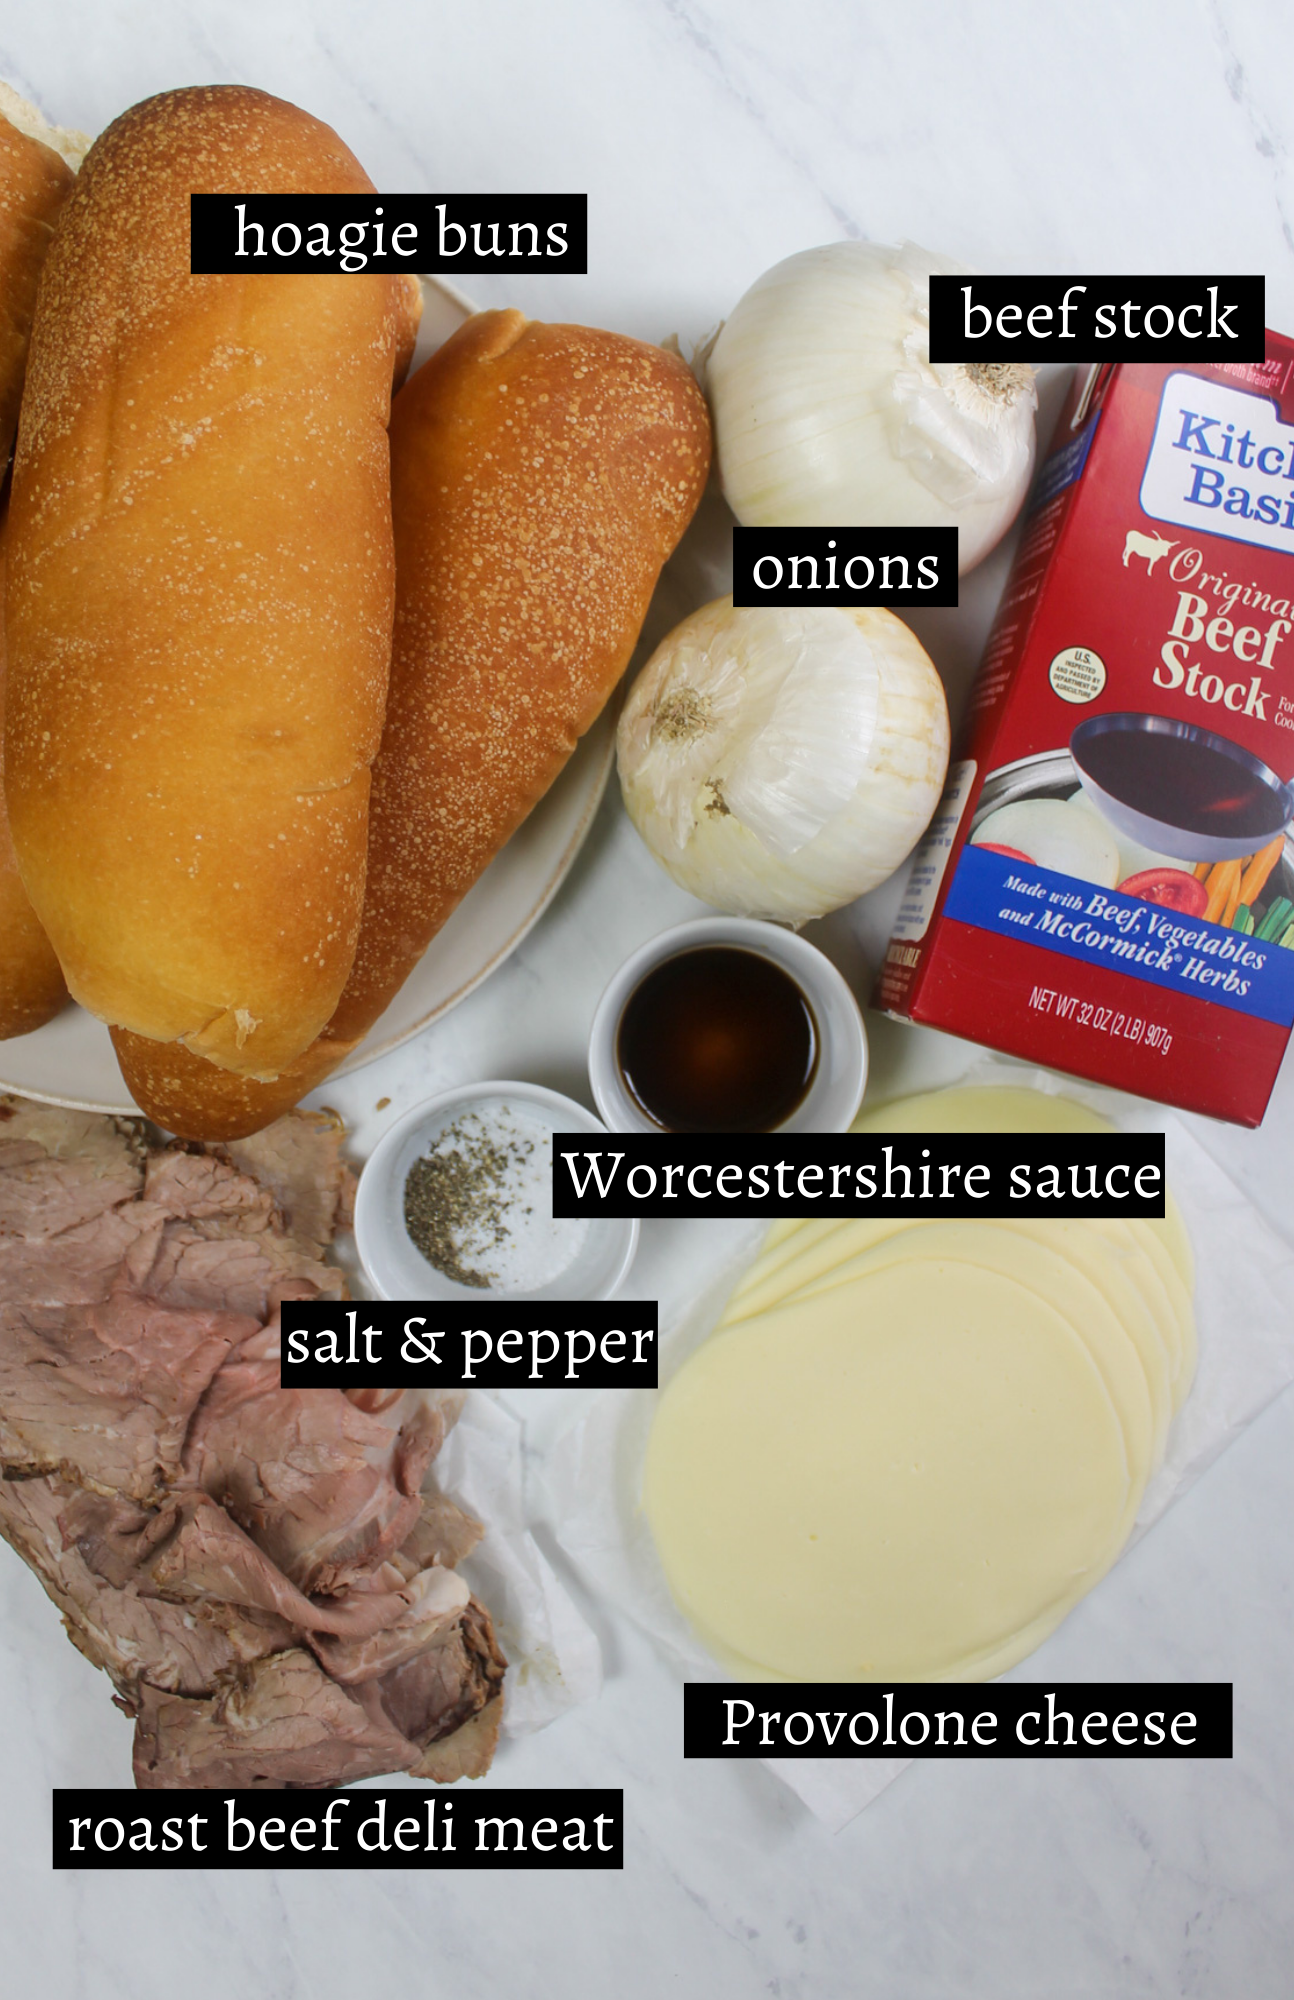 Labeled ingredients for French dip sandwiches.